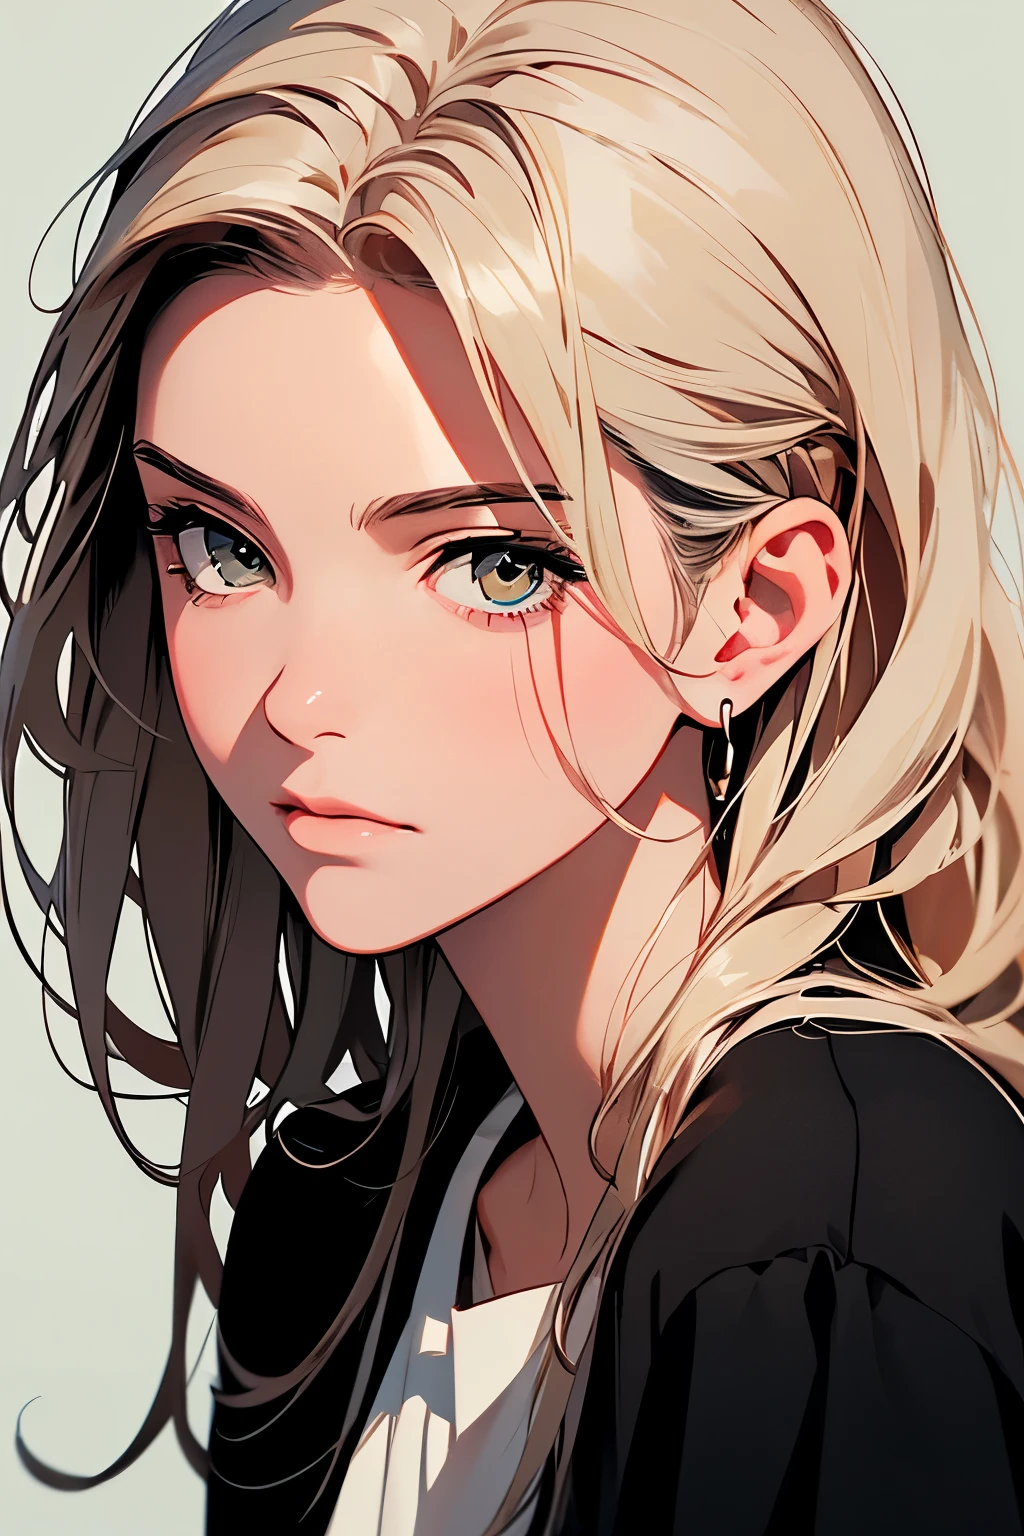 2D illustration, anime, portrait в изобразительном искусстве, in manhwa style, Bishamon from Noragami, 1 Girl, blond long hair, big hair, curly hair, {{фиоsummerвые глаза}}, draw up, Beautiful, a high resolution, masterpiece, Best quality, high detail, high detailed eyes, Grain filter, Detailed lips, a high resolution, ultra detailed, portrait, Caucasian Woman, Realistic proportions, Anatomically accurate, rosy cheeks; dark lighting, High quality, Awarded, a high resolution, 8K,, summer, obscene, Granularity, Илфорд HP5, 80 mm, strong soman, confident, Black clothes, (piece of art:1.2), better quality, pixiv, cool girl, glorious, blond hair, two, short shorts, big chest, brilliant earnings